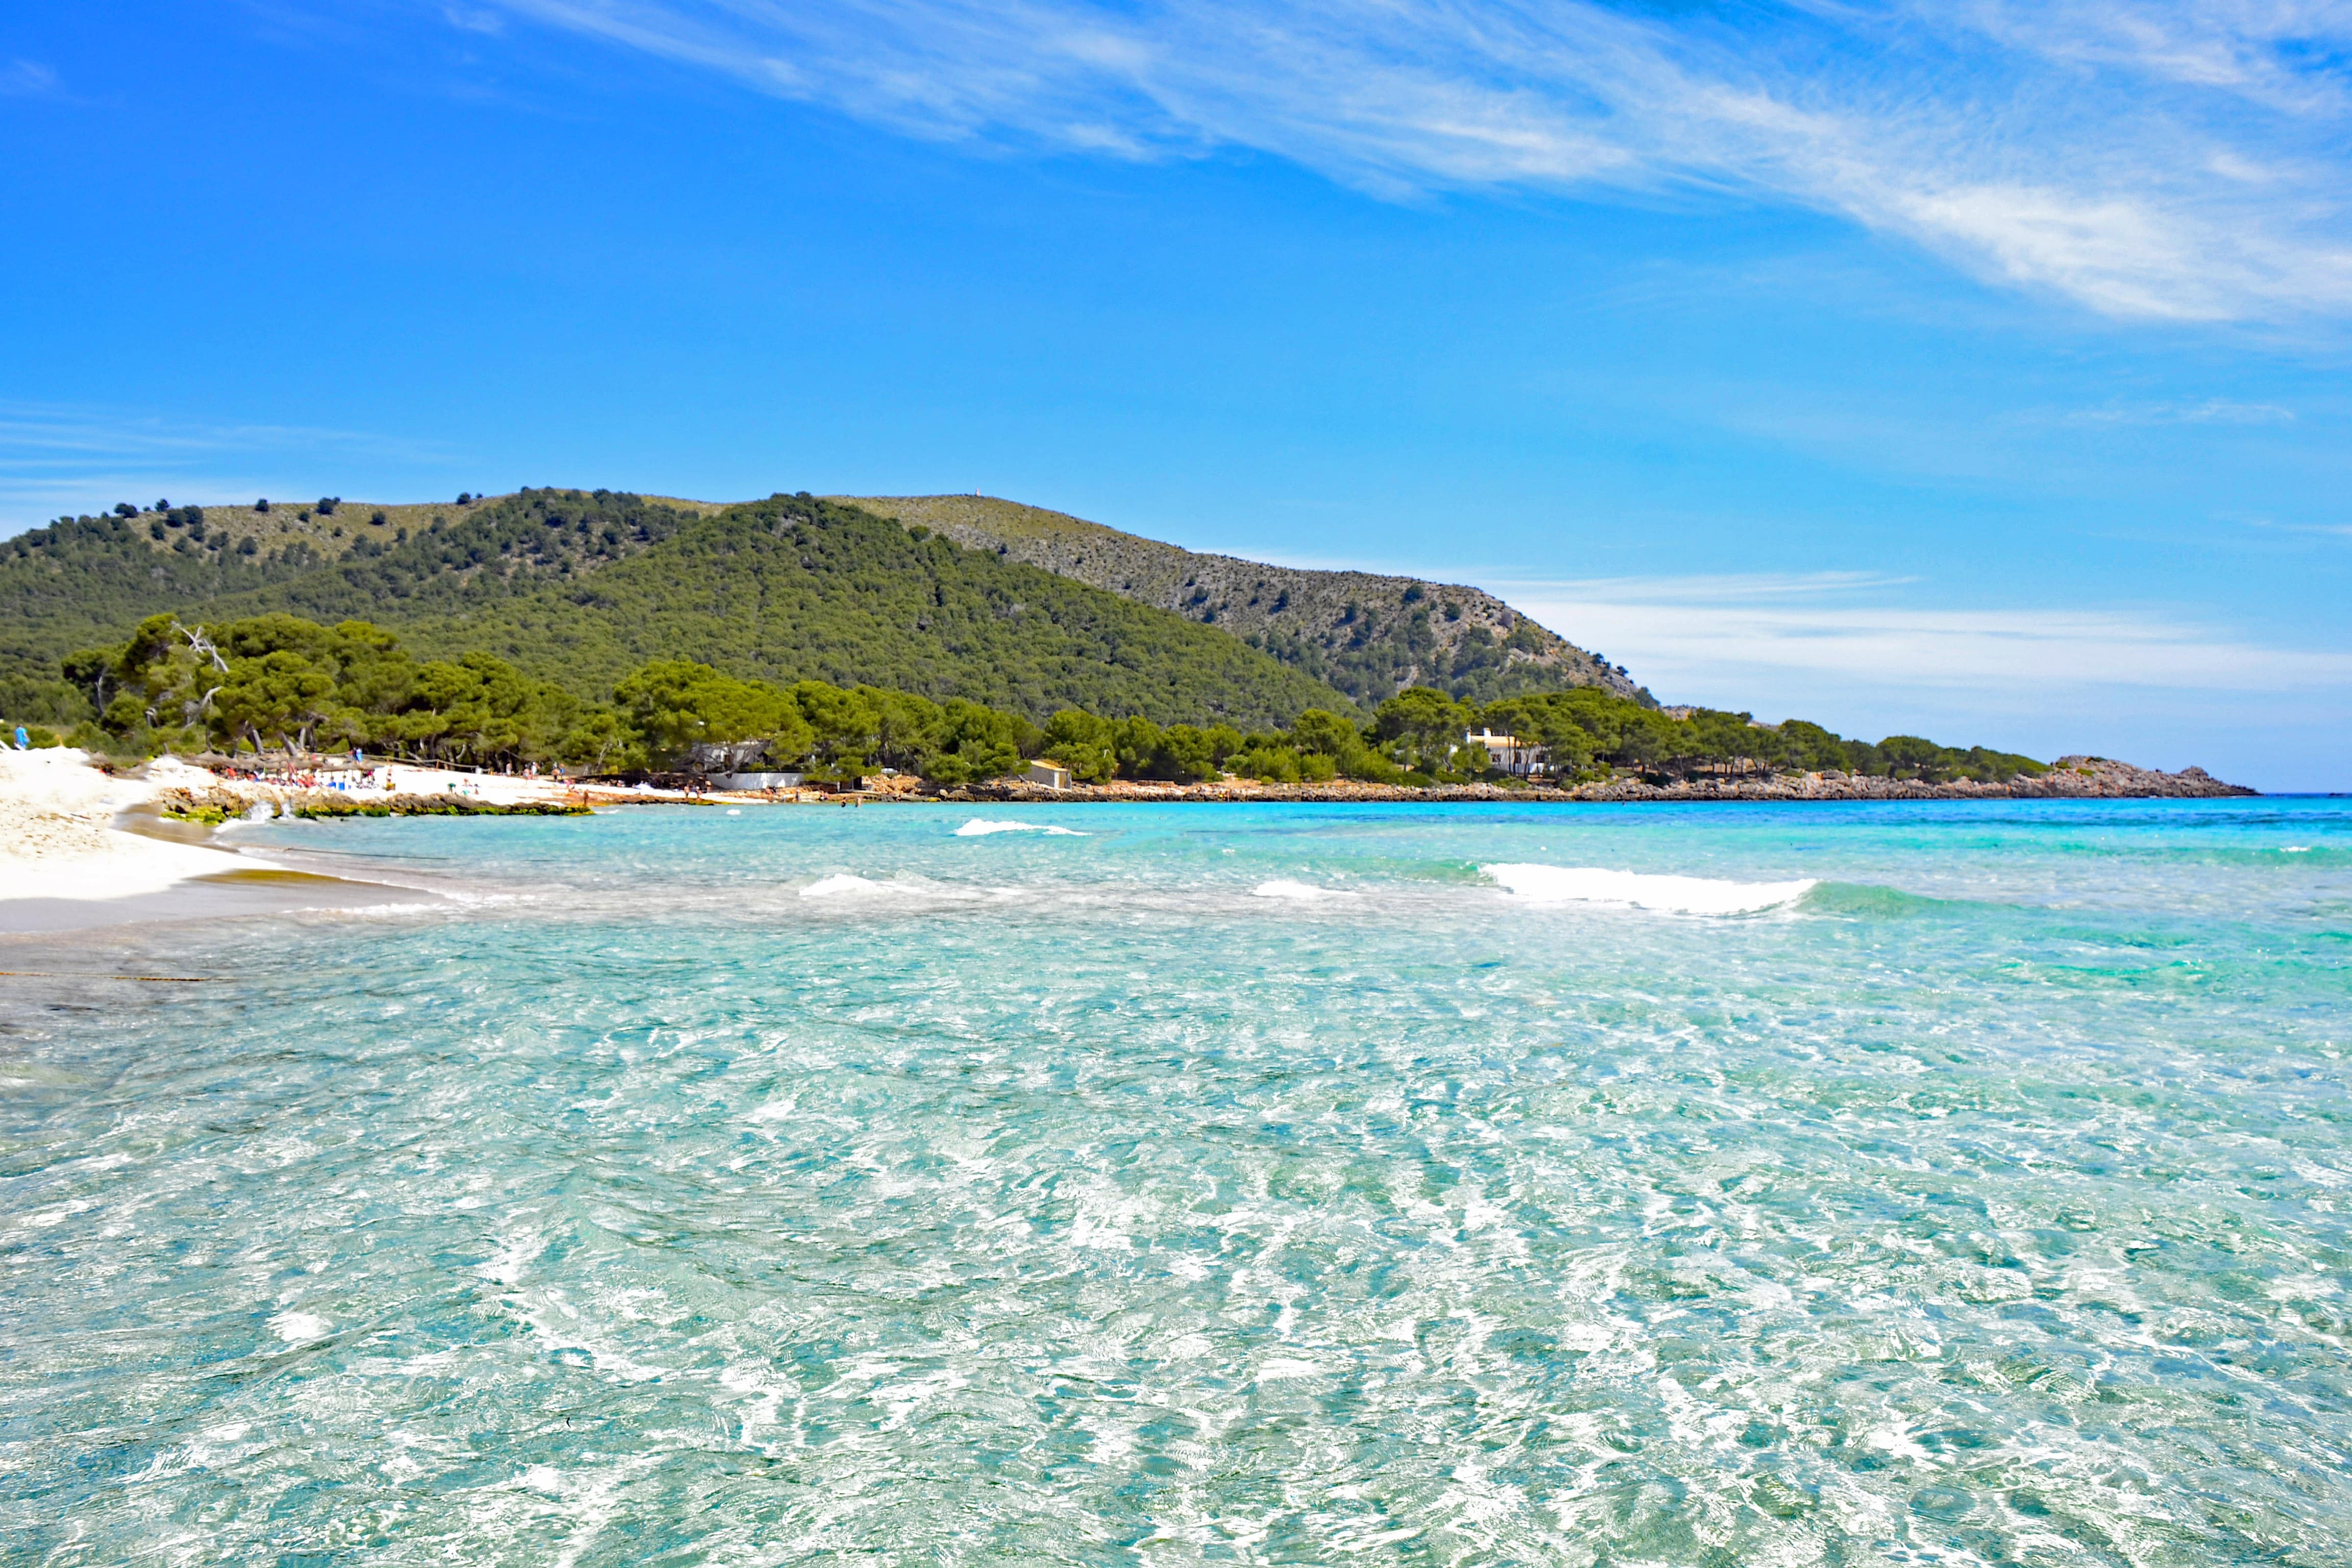 The kids will enjoy the many beaches of the Balearic Islands